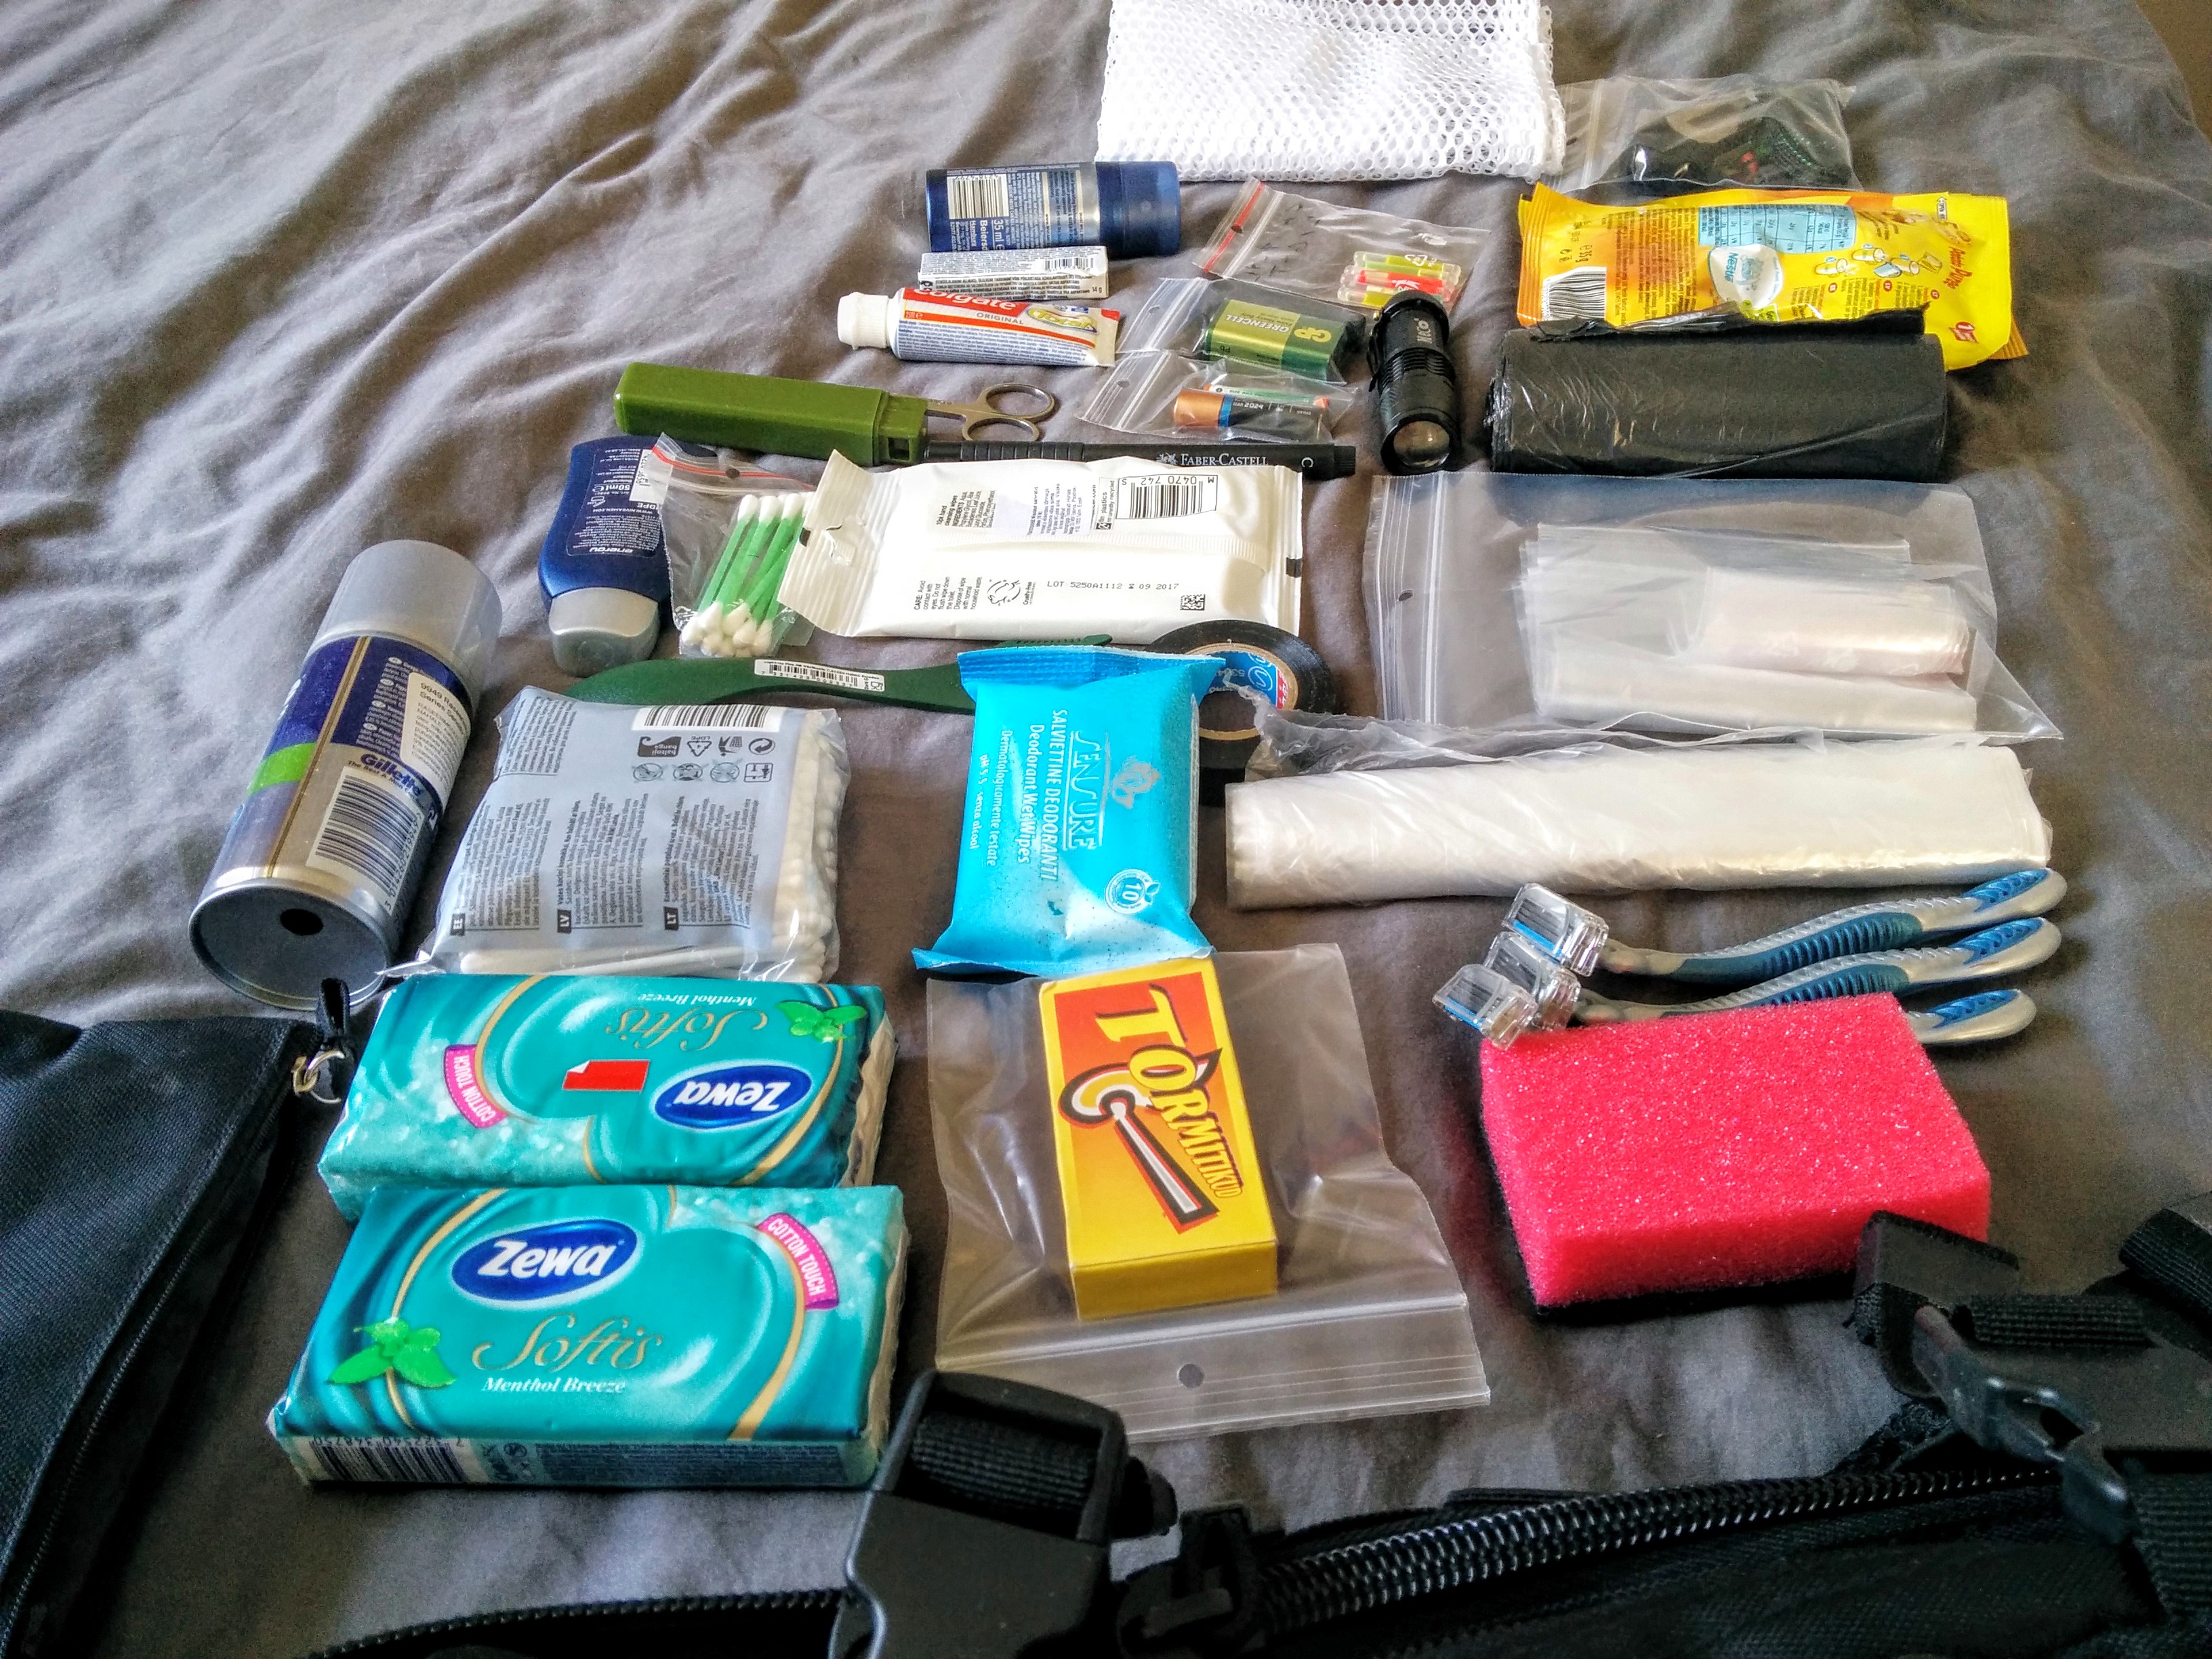 Items included in the bag